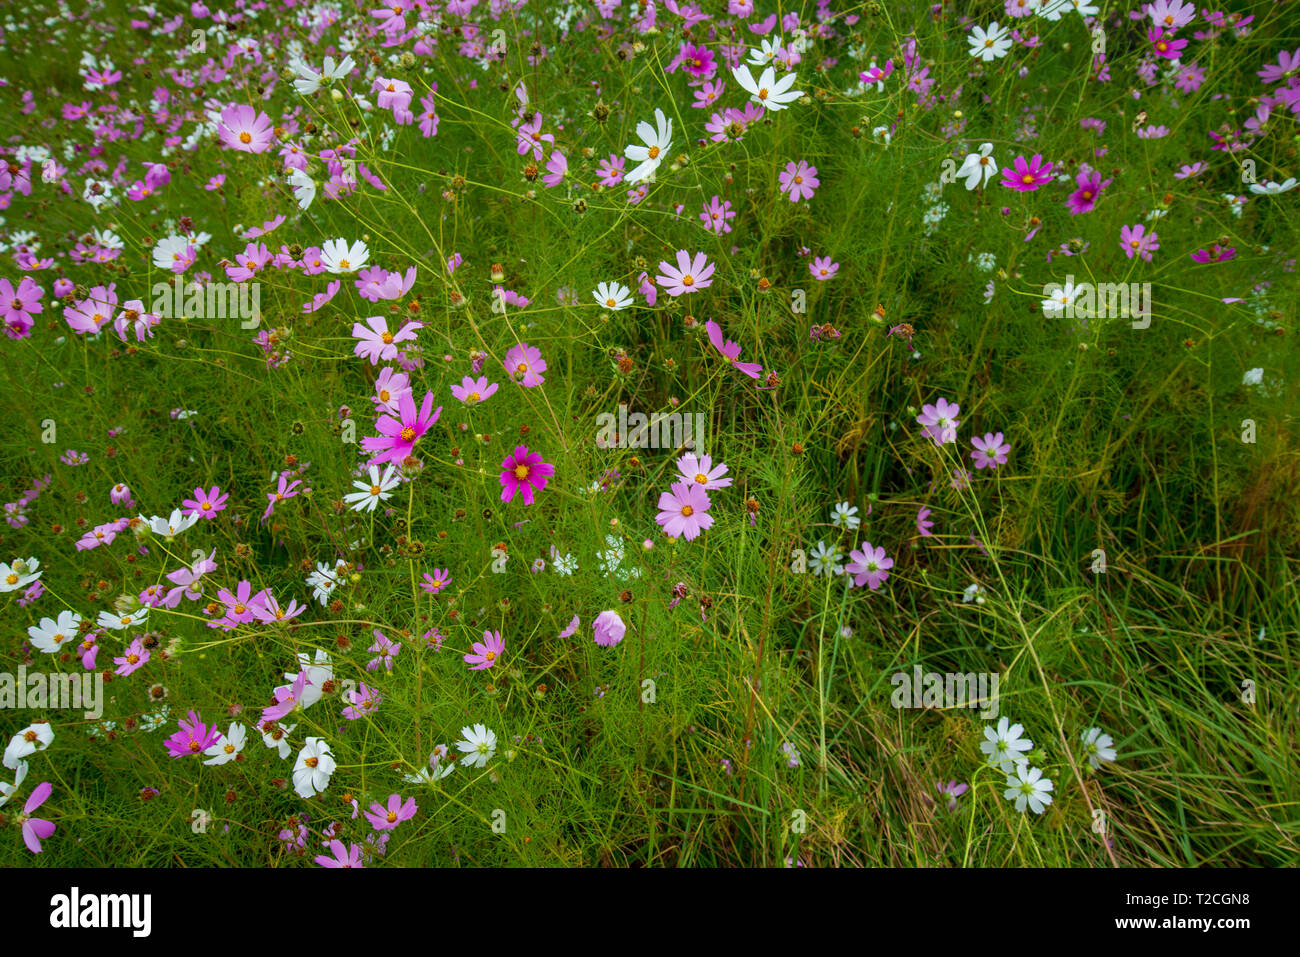 Johannesburg, South Africa, 1st April, 2019. Rain clouds roll in over a field of Cosmos flowers in Delta Park. Cosmos bloom here in March, as autumn starts, as well as in November. Credit: Eva-Lotta Jansson/Alamy News Stock Photo